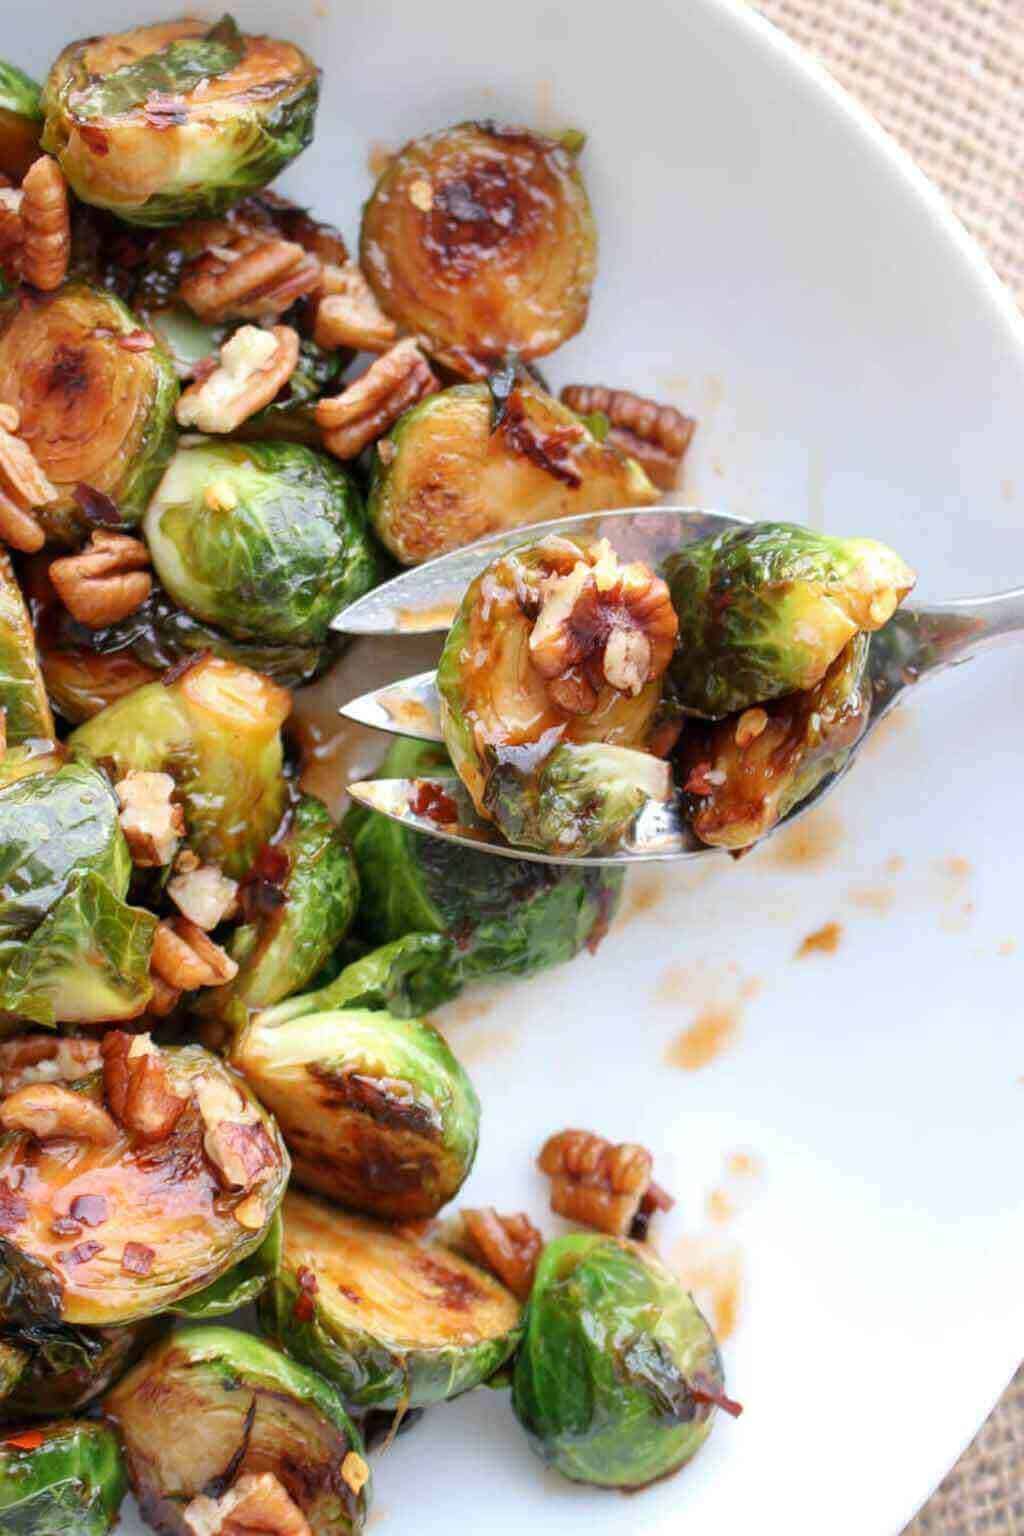 roasted Brussels sprouts with a sweet-sour glaze